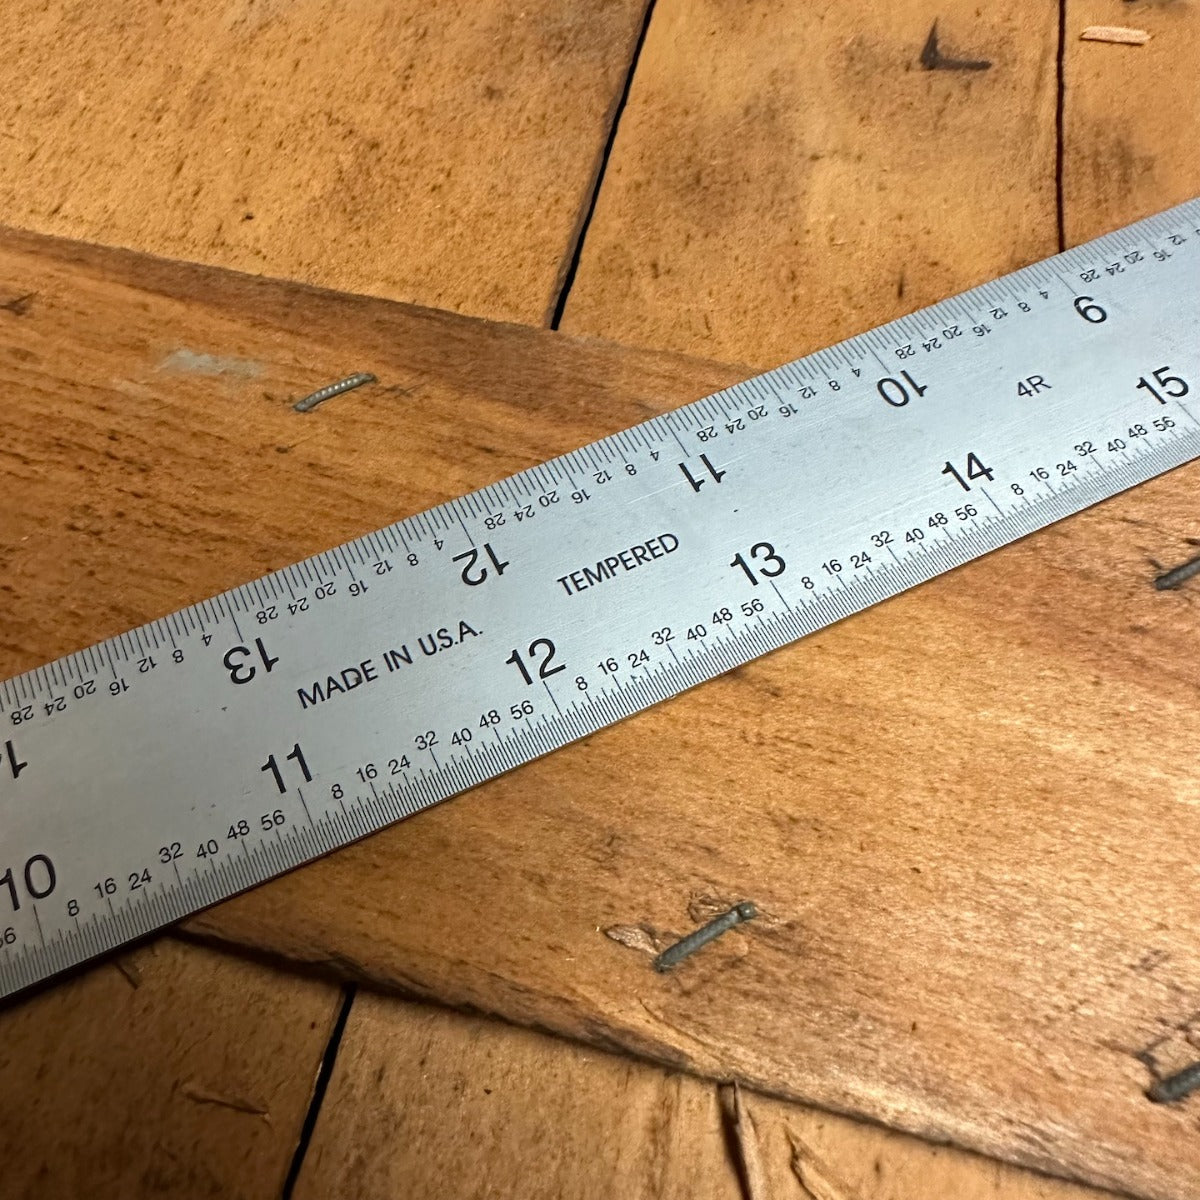 24" Products Engineering 4R Rigid Tempered Ruler 8ths/16ths 32nds/64ths Cosmetic blemish, name removed(780061)